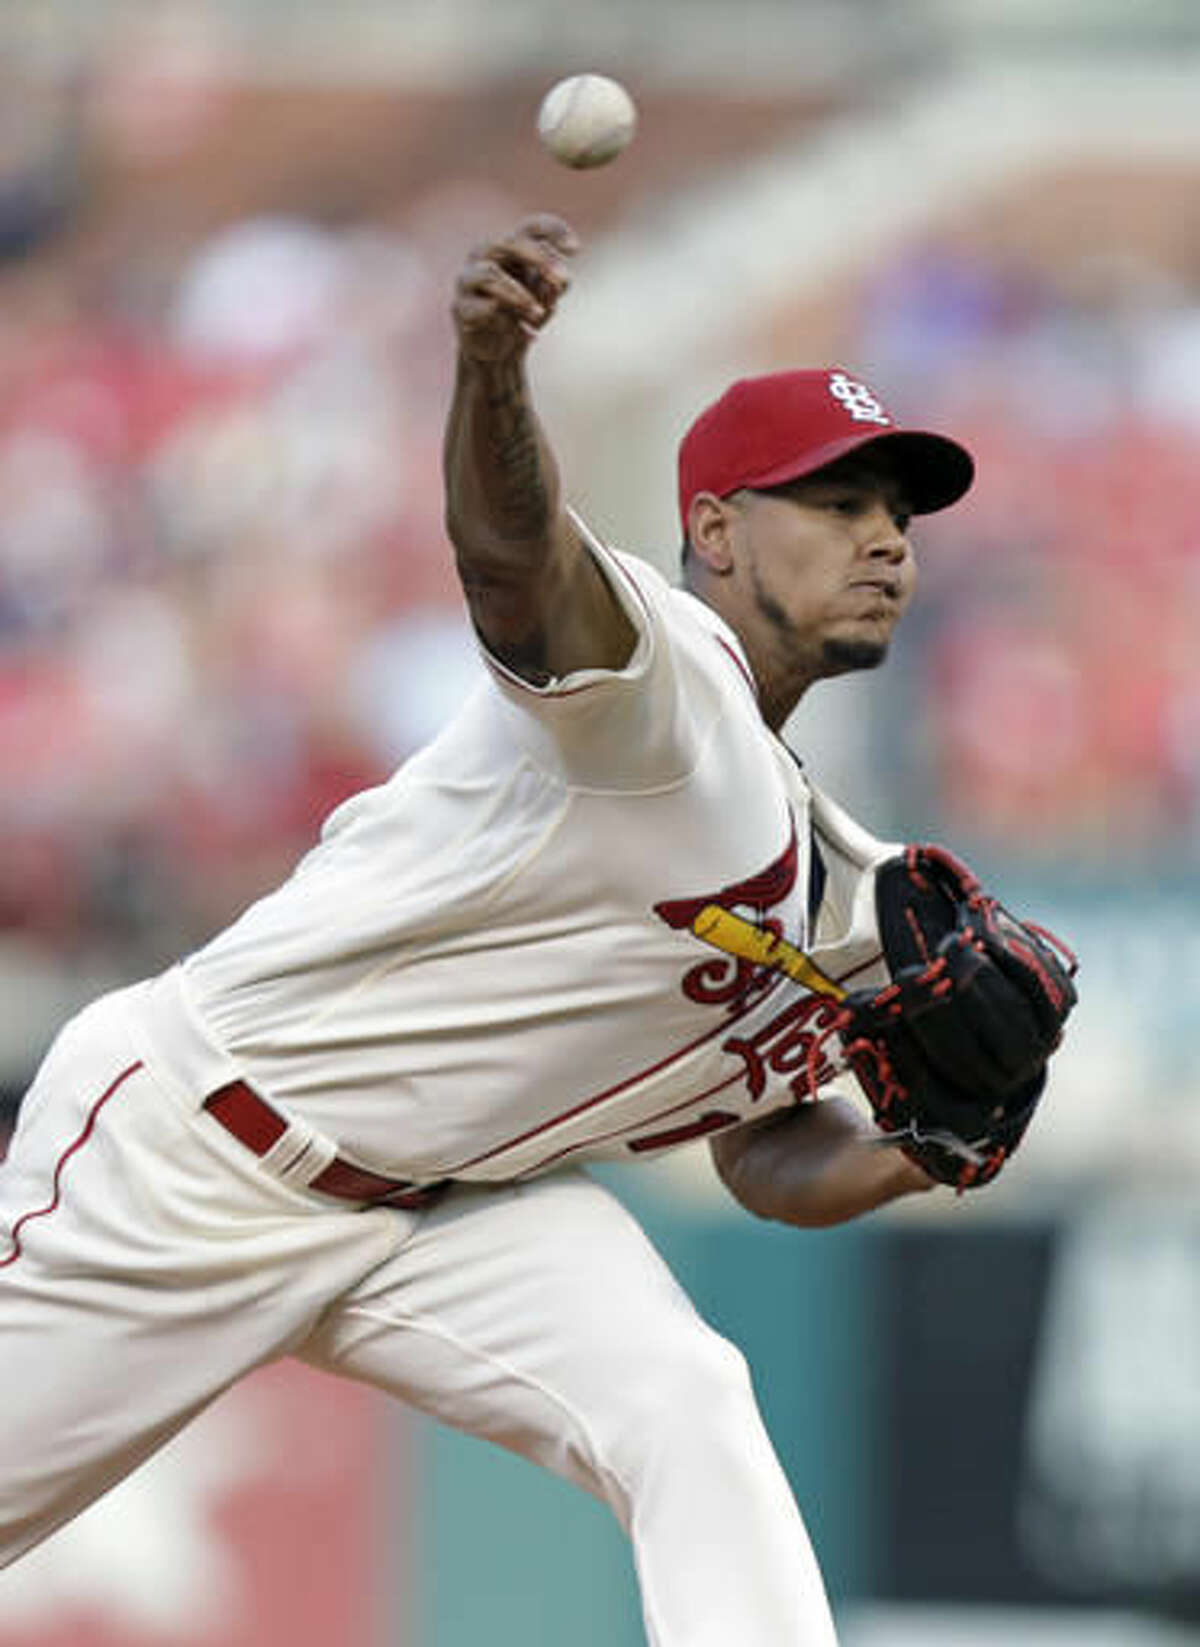 St. Louis Cardinals starting pitcher Carlos Martinez delivers a pitch in the first inning of a baseball game against the Atlanta Braves, Saturday, Aug. 6, 2016, in St. Louis. (AP Photo/Tom Gannam)